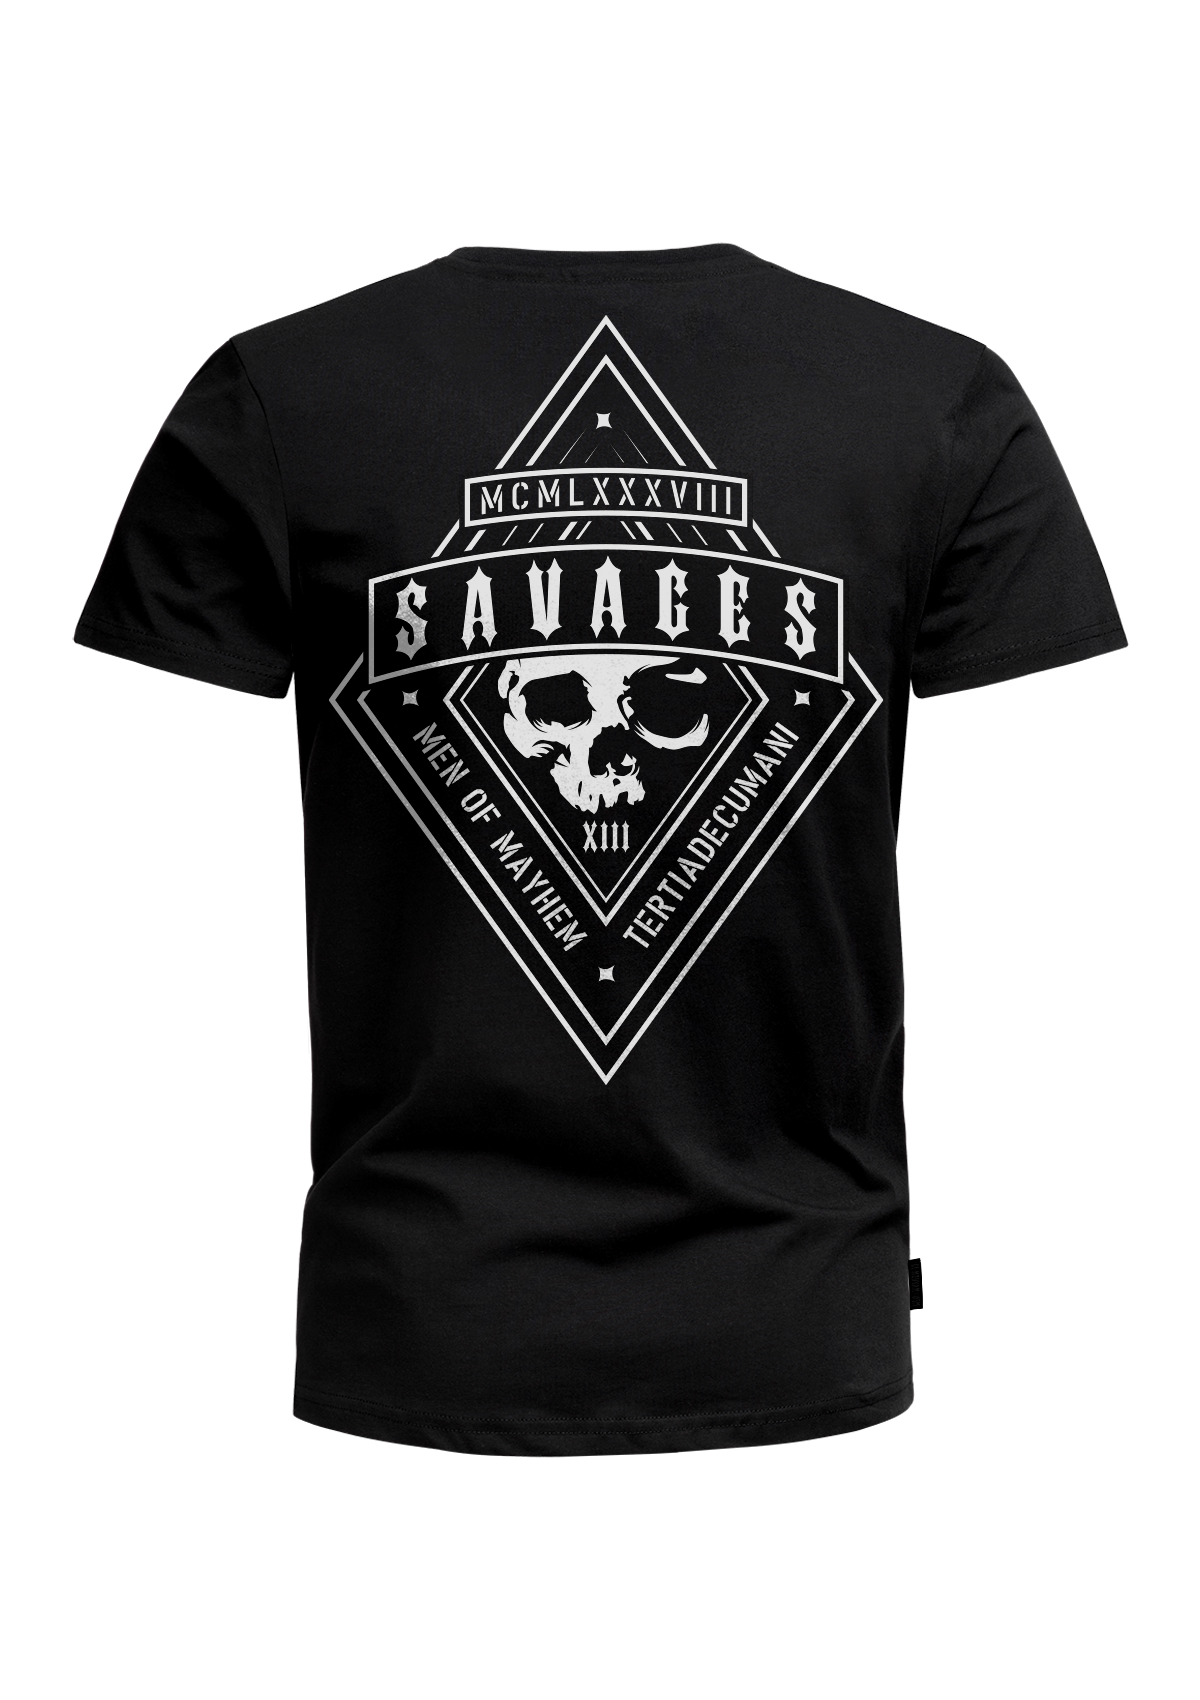 T-Shirt Savages S/W